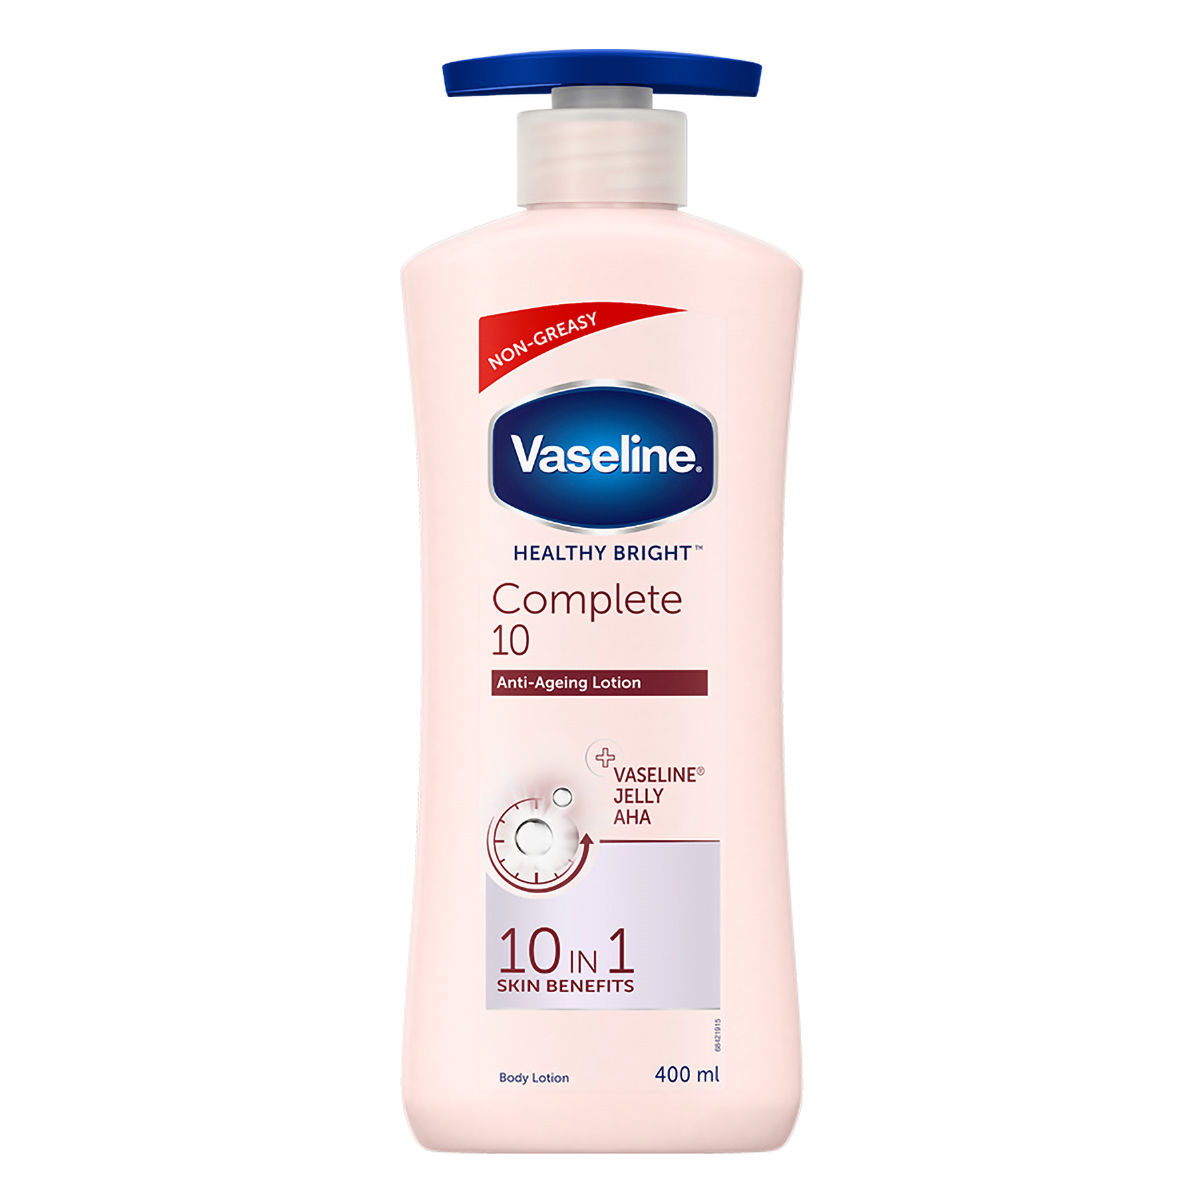 Buy Vaseline Healthy Bright Complete10 Anti-Ageing Lotion, 400 ml Online